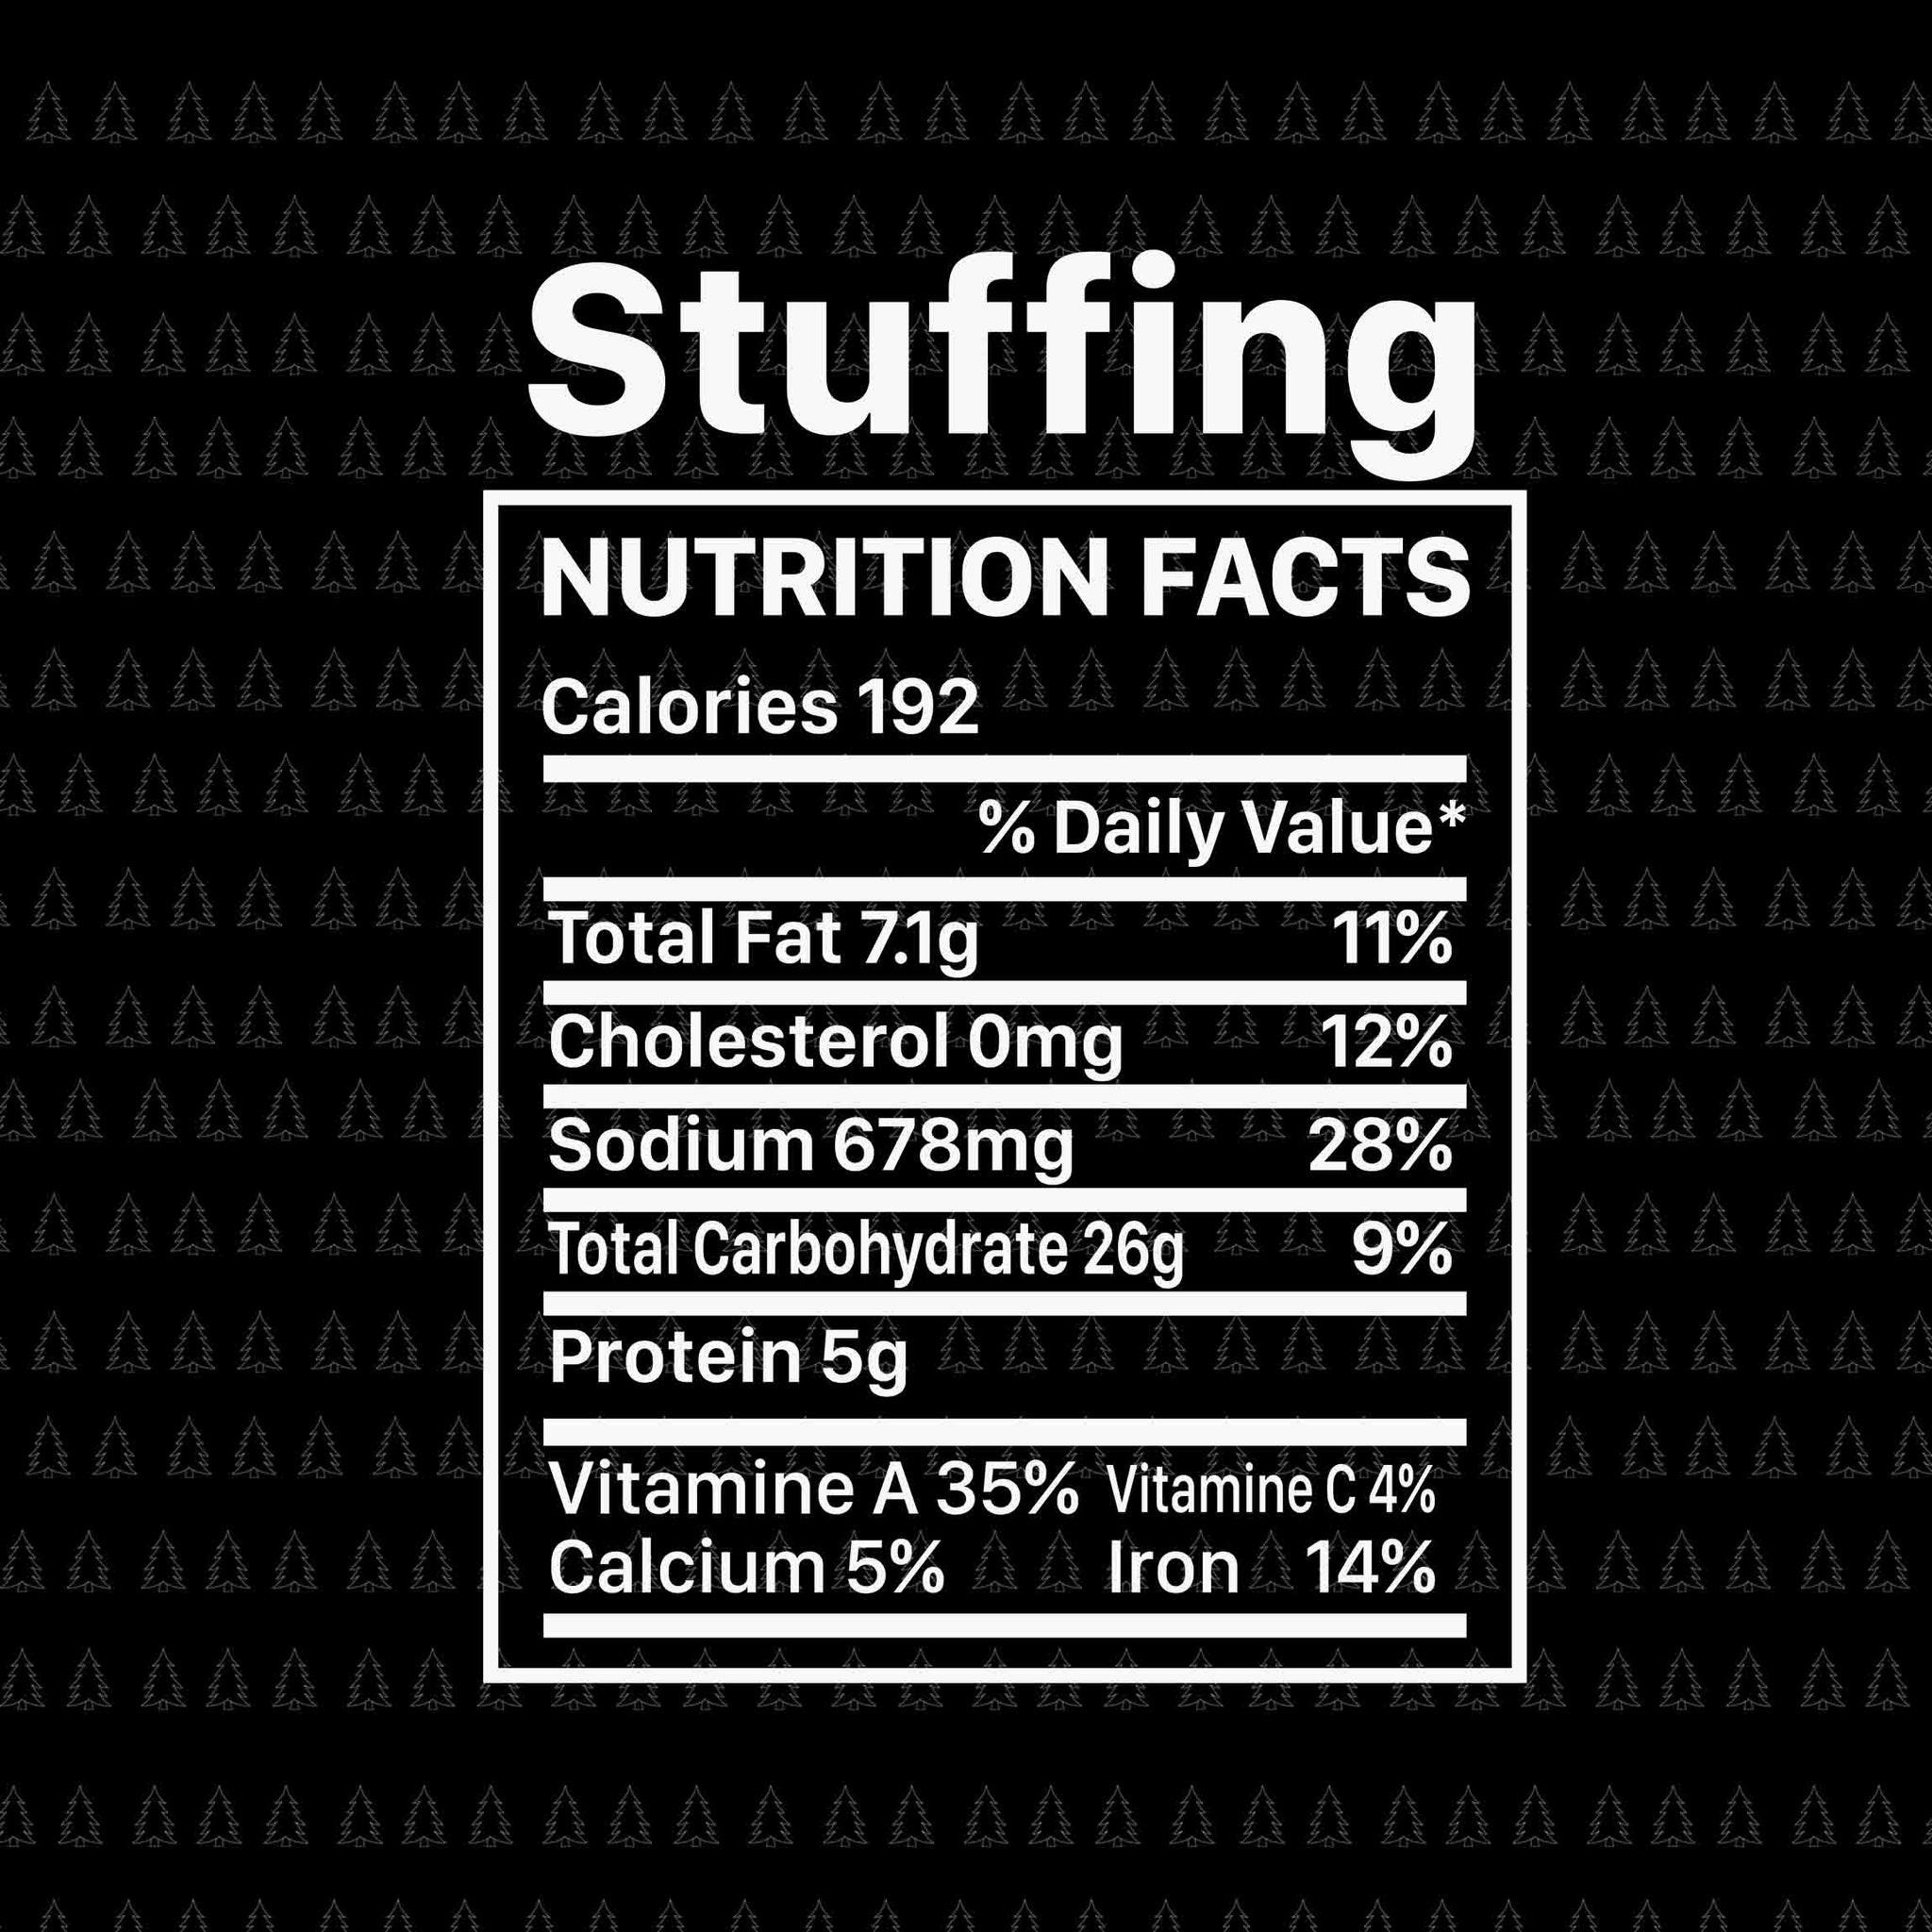 Stuffing Nutrition Facts Svg, Happy Thanksgiving Svg, Turkey Svg, Turkey Day Svg, Thanksgiving Svg, Thanksgiving Turkey Svg, Thanksgiving 2021 Svg